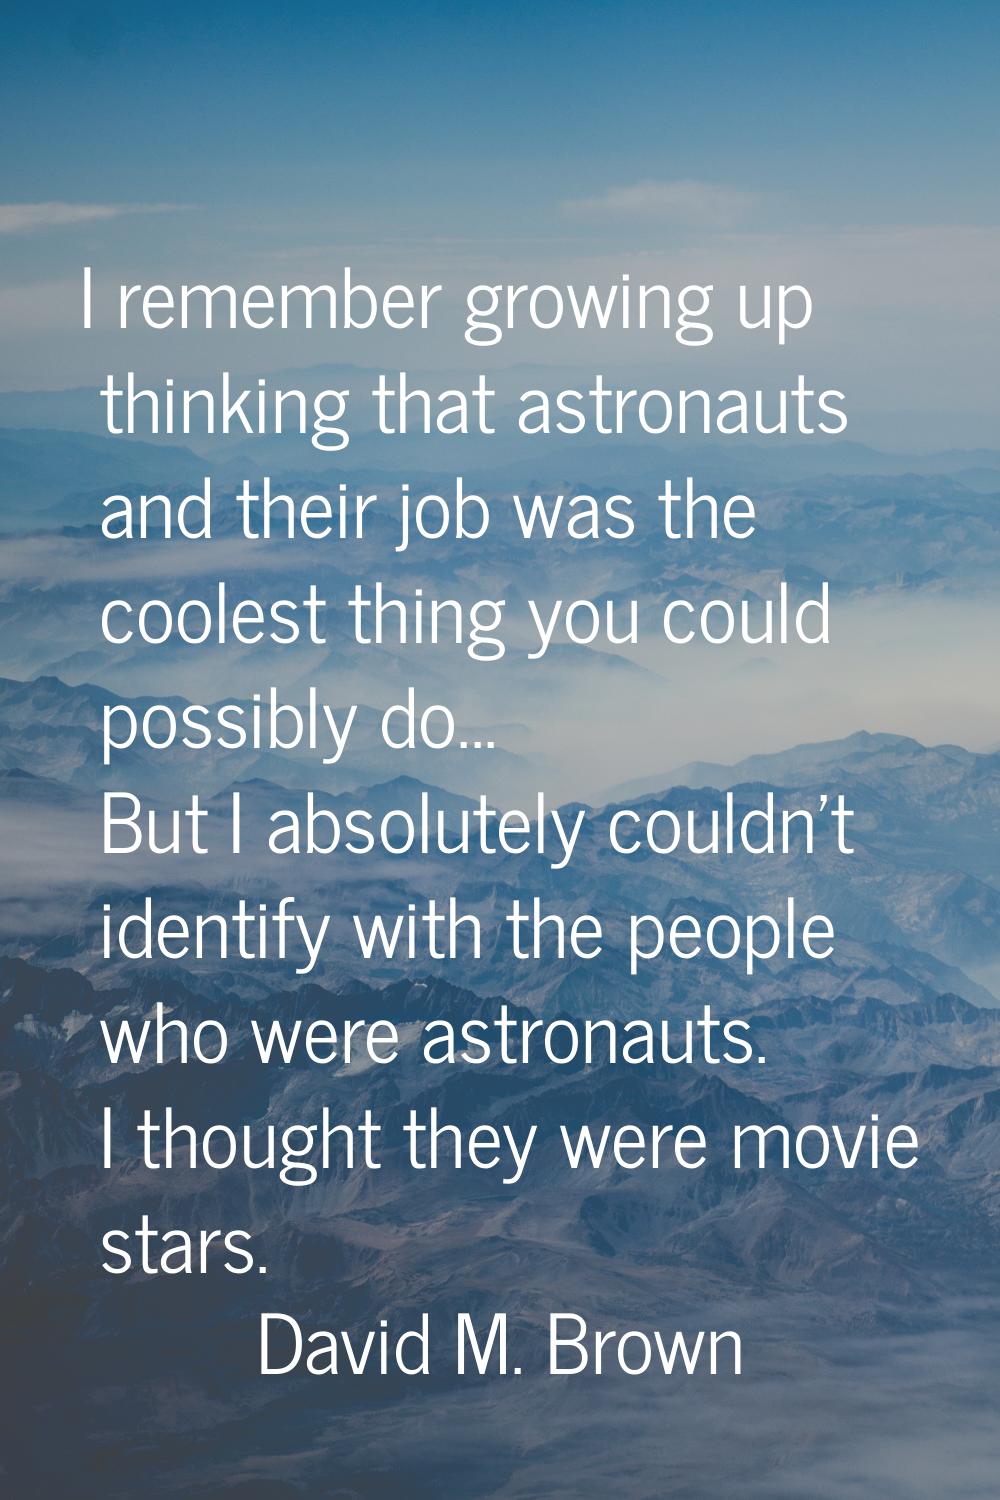 I remember growing up thinking that astronauts and their job was the coolest thing you could possib